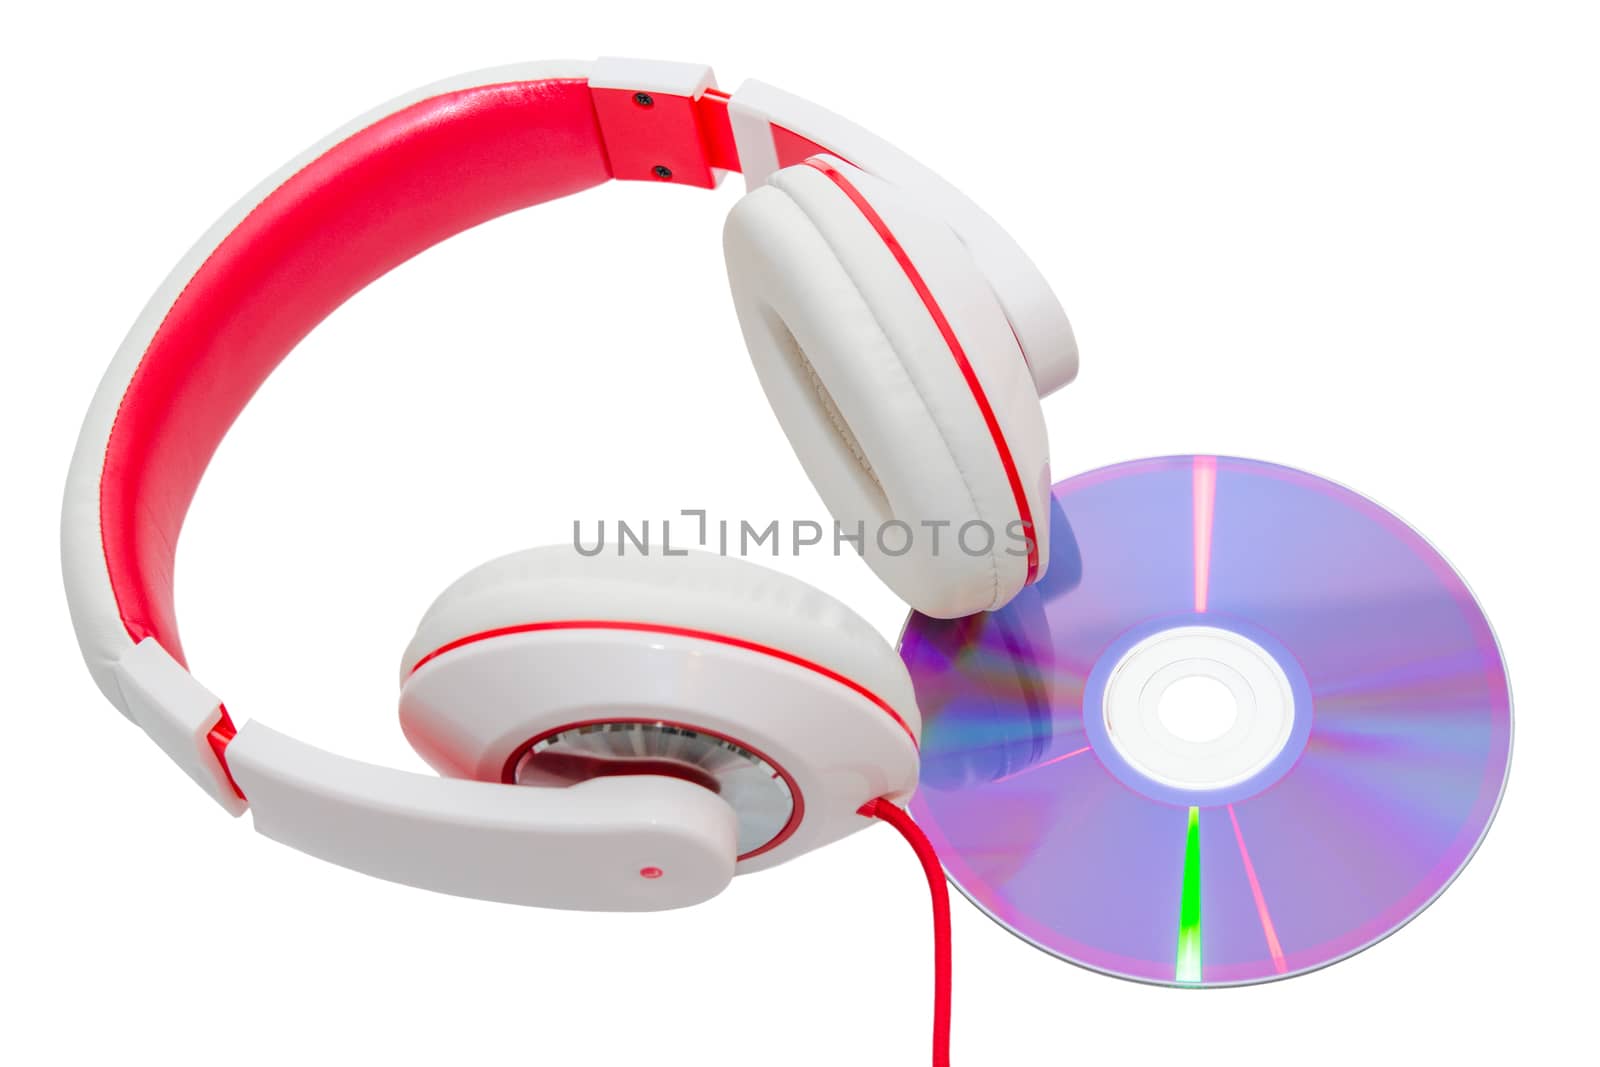 Vivid classic wired headphones and compact disc isolated on white